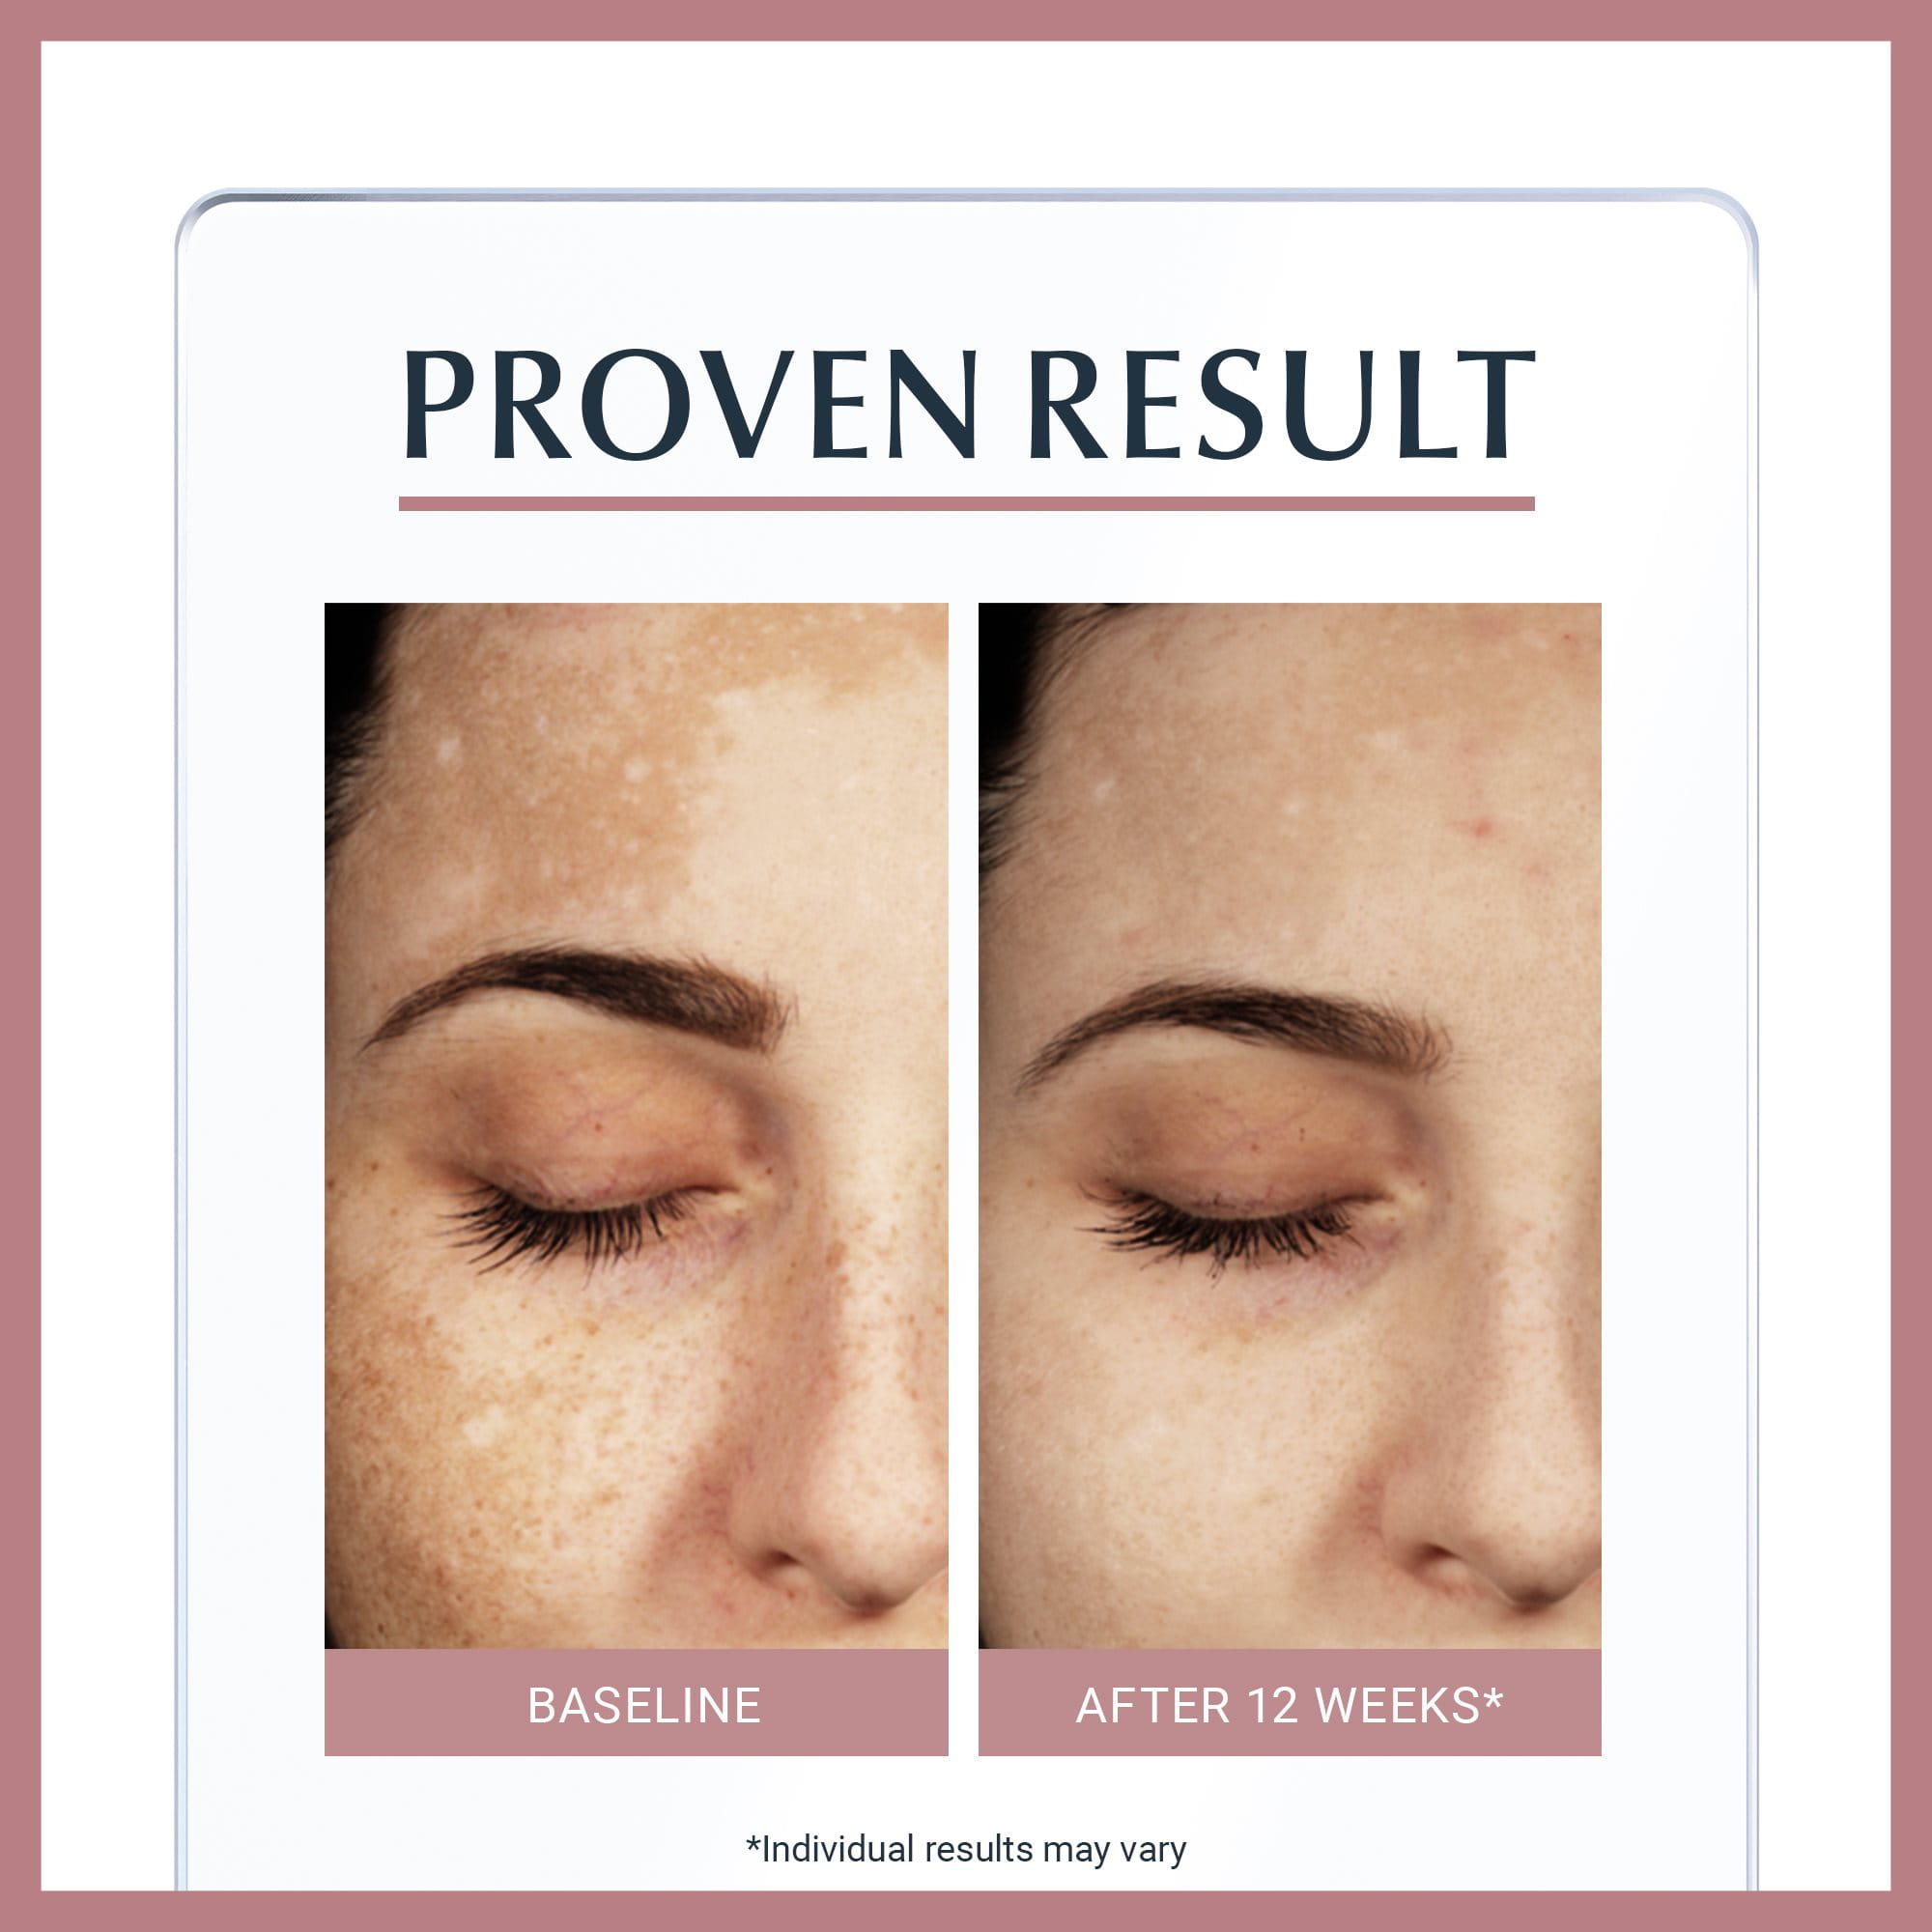 First results of hyperpigmentation reduction are visible in just 12 weeks, showing a reduction of -75%.